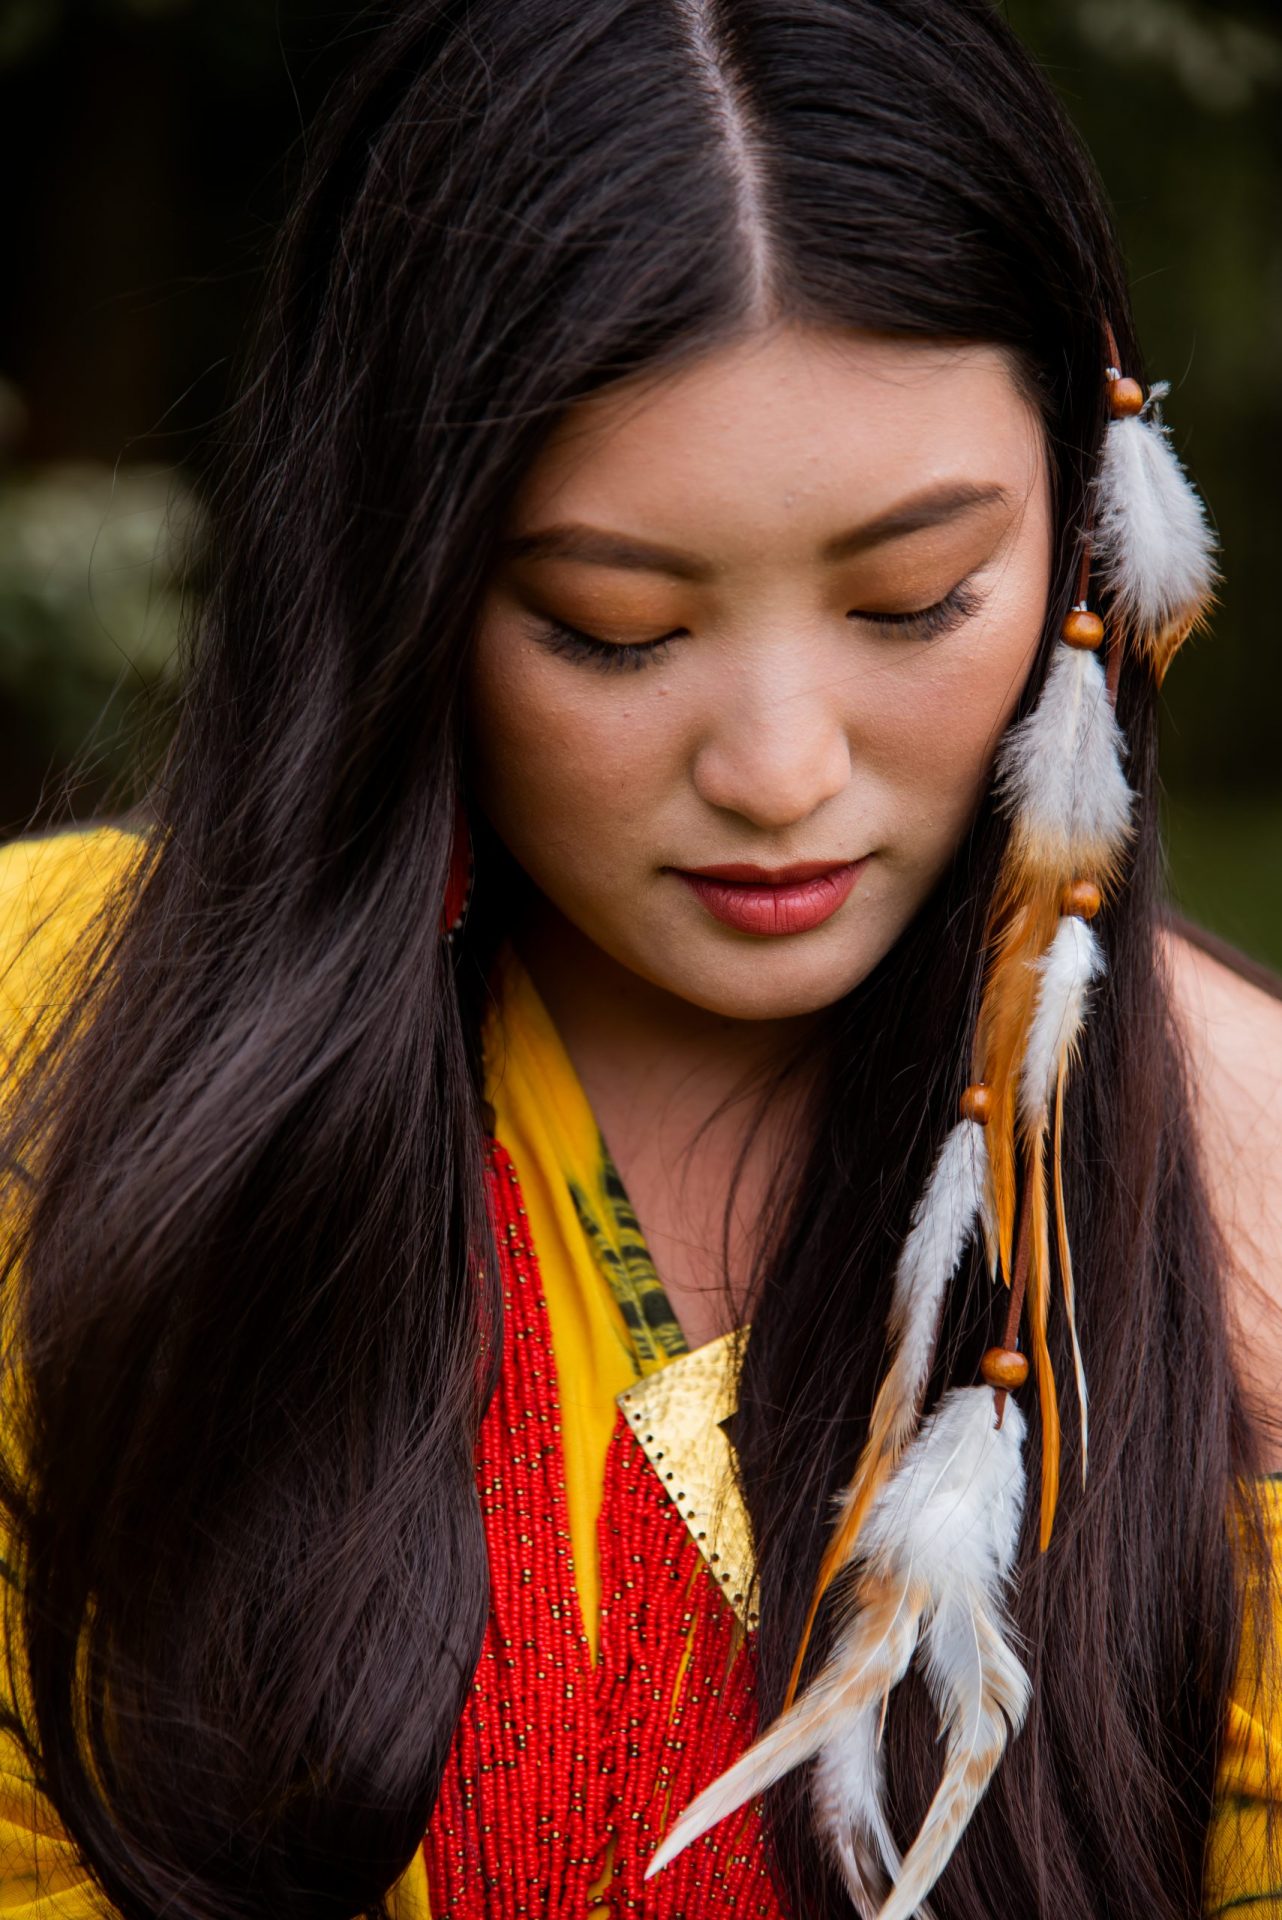 Native American Product Code NA 0061 - American Vision Photography